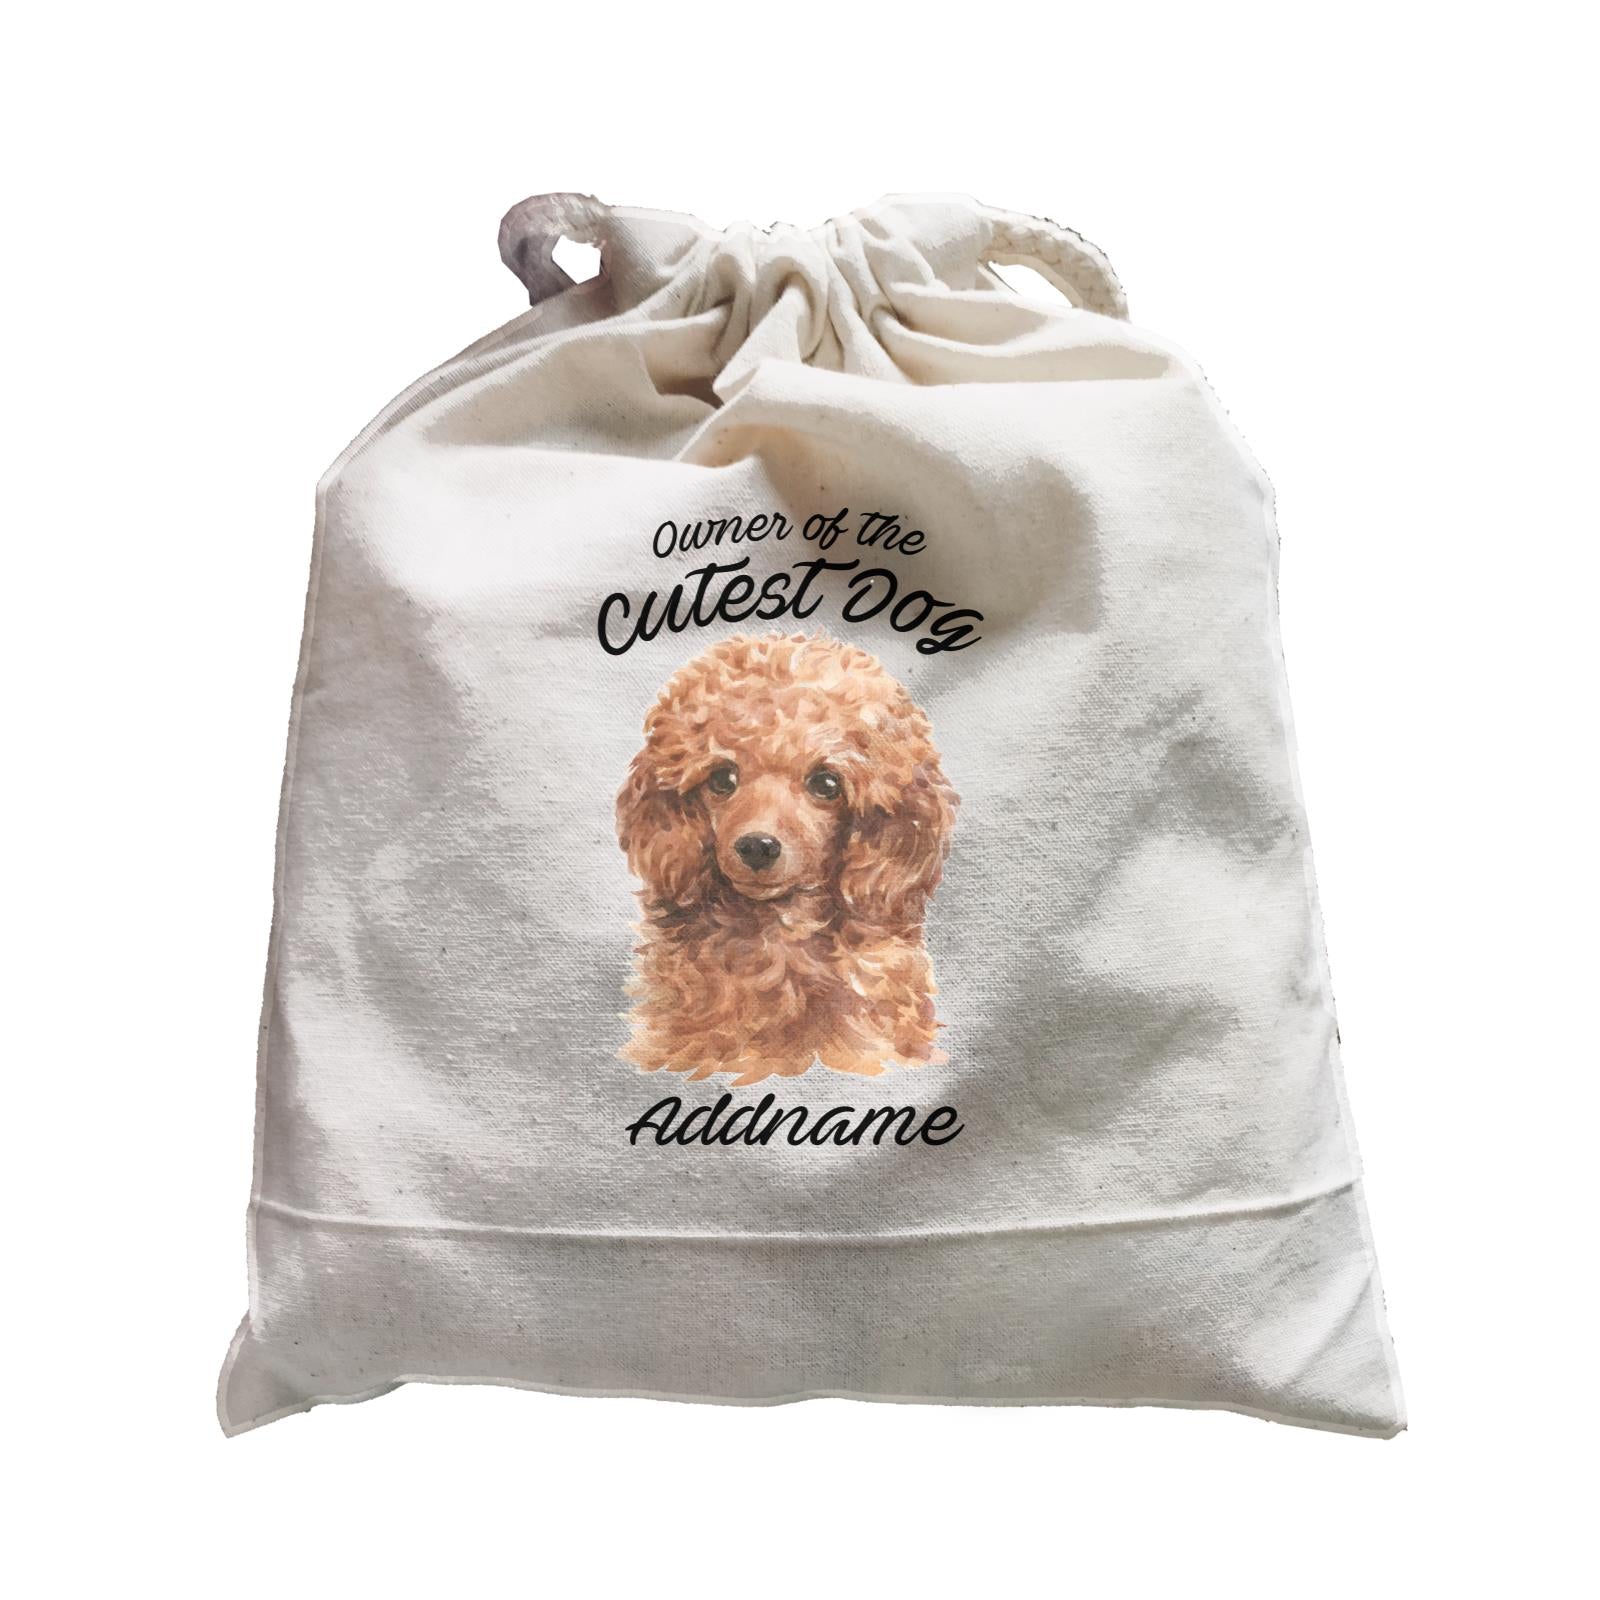 Watercolor Dog Owner Of The Cutest Dog Poodle Brown Addname Satchel